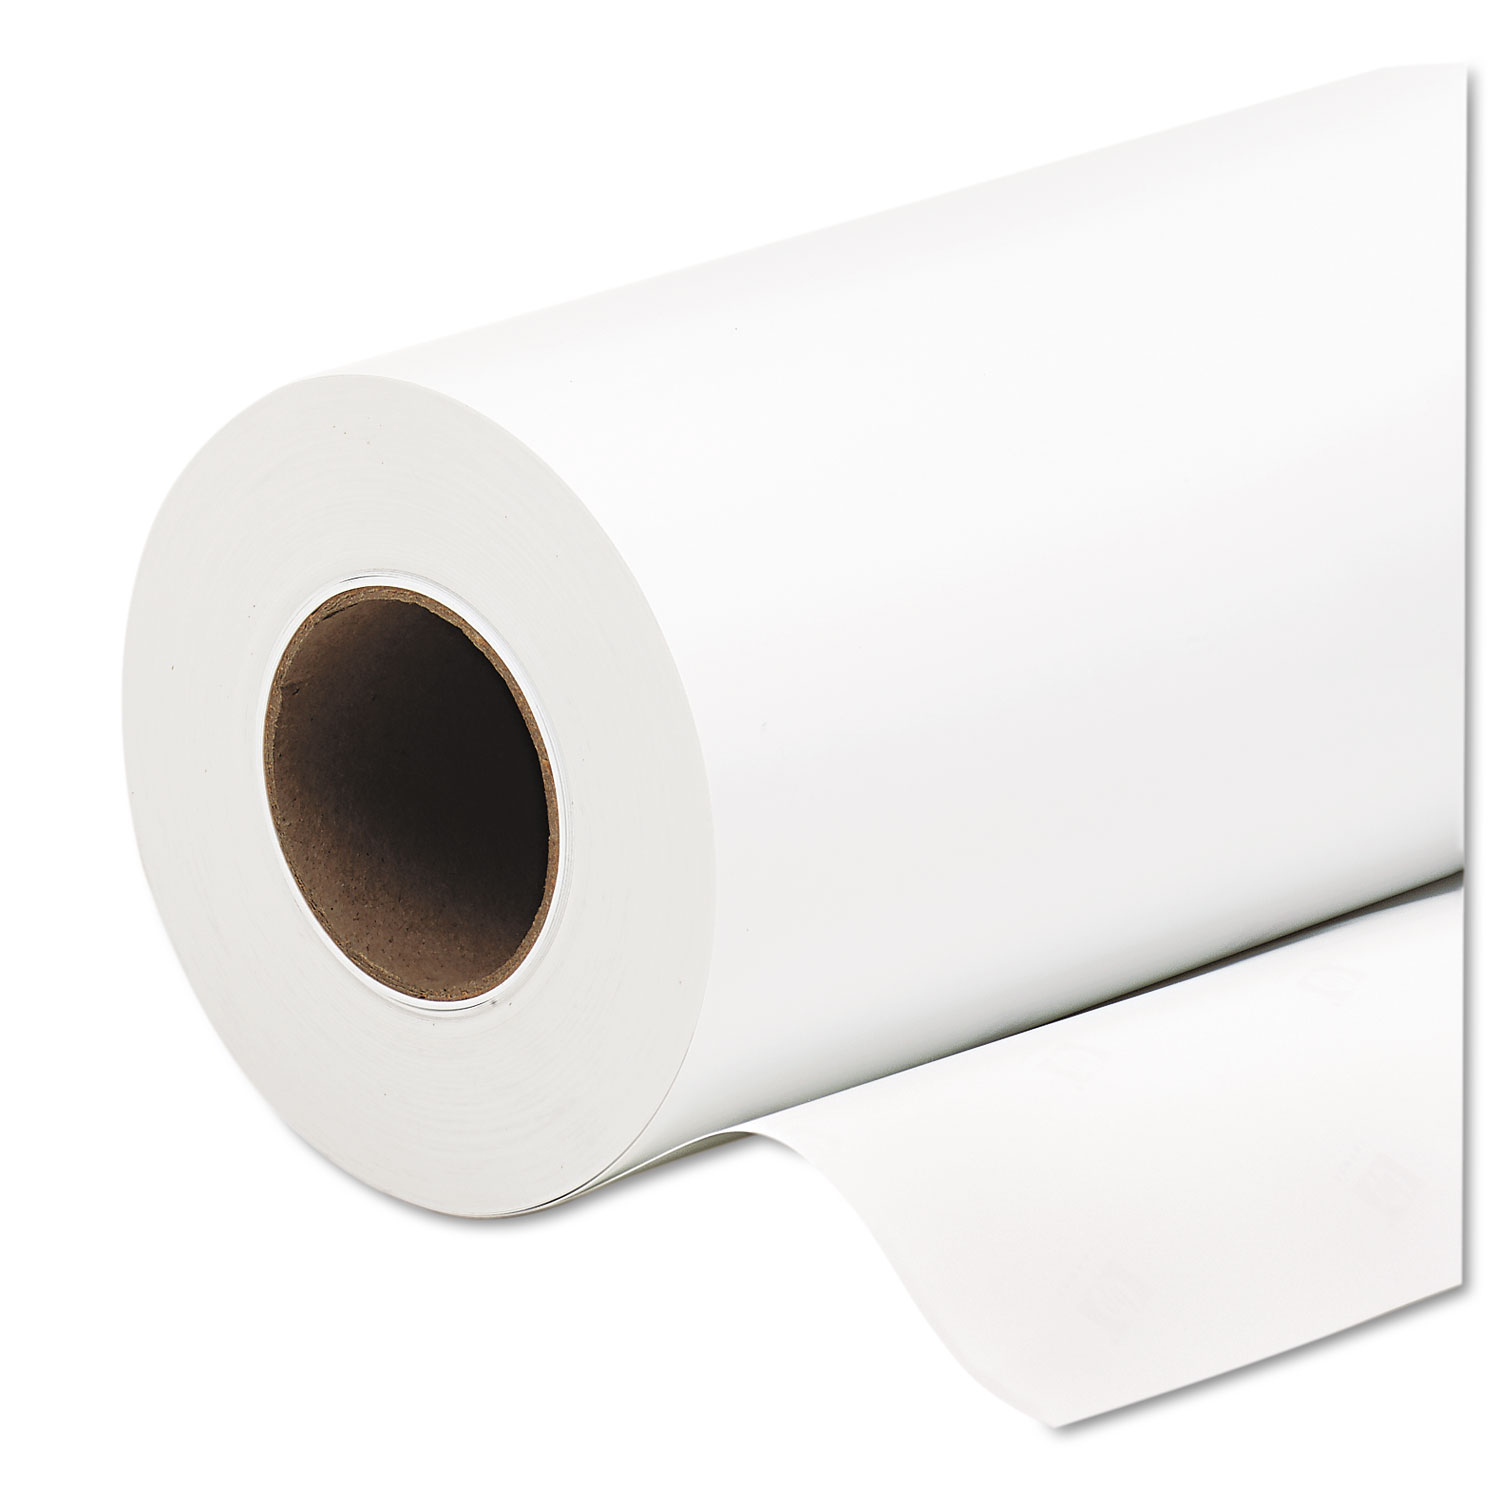  HP Q8916A Everyday Pigment Ink Photo Paper Roll, 9.1 mil, 24 x 100 ft, Glossy White (HEWQ8916A) 